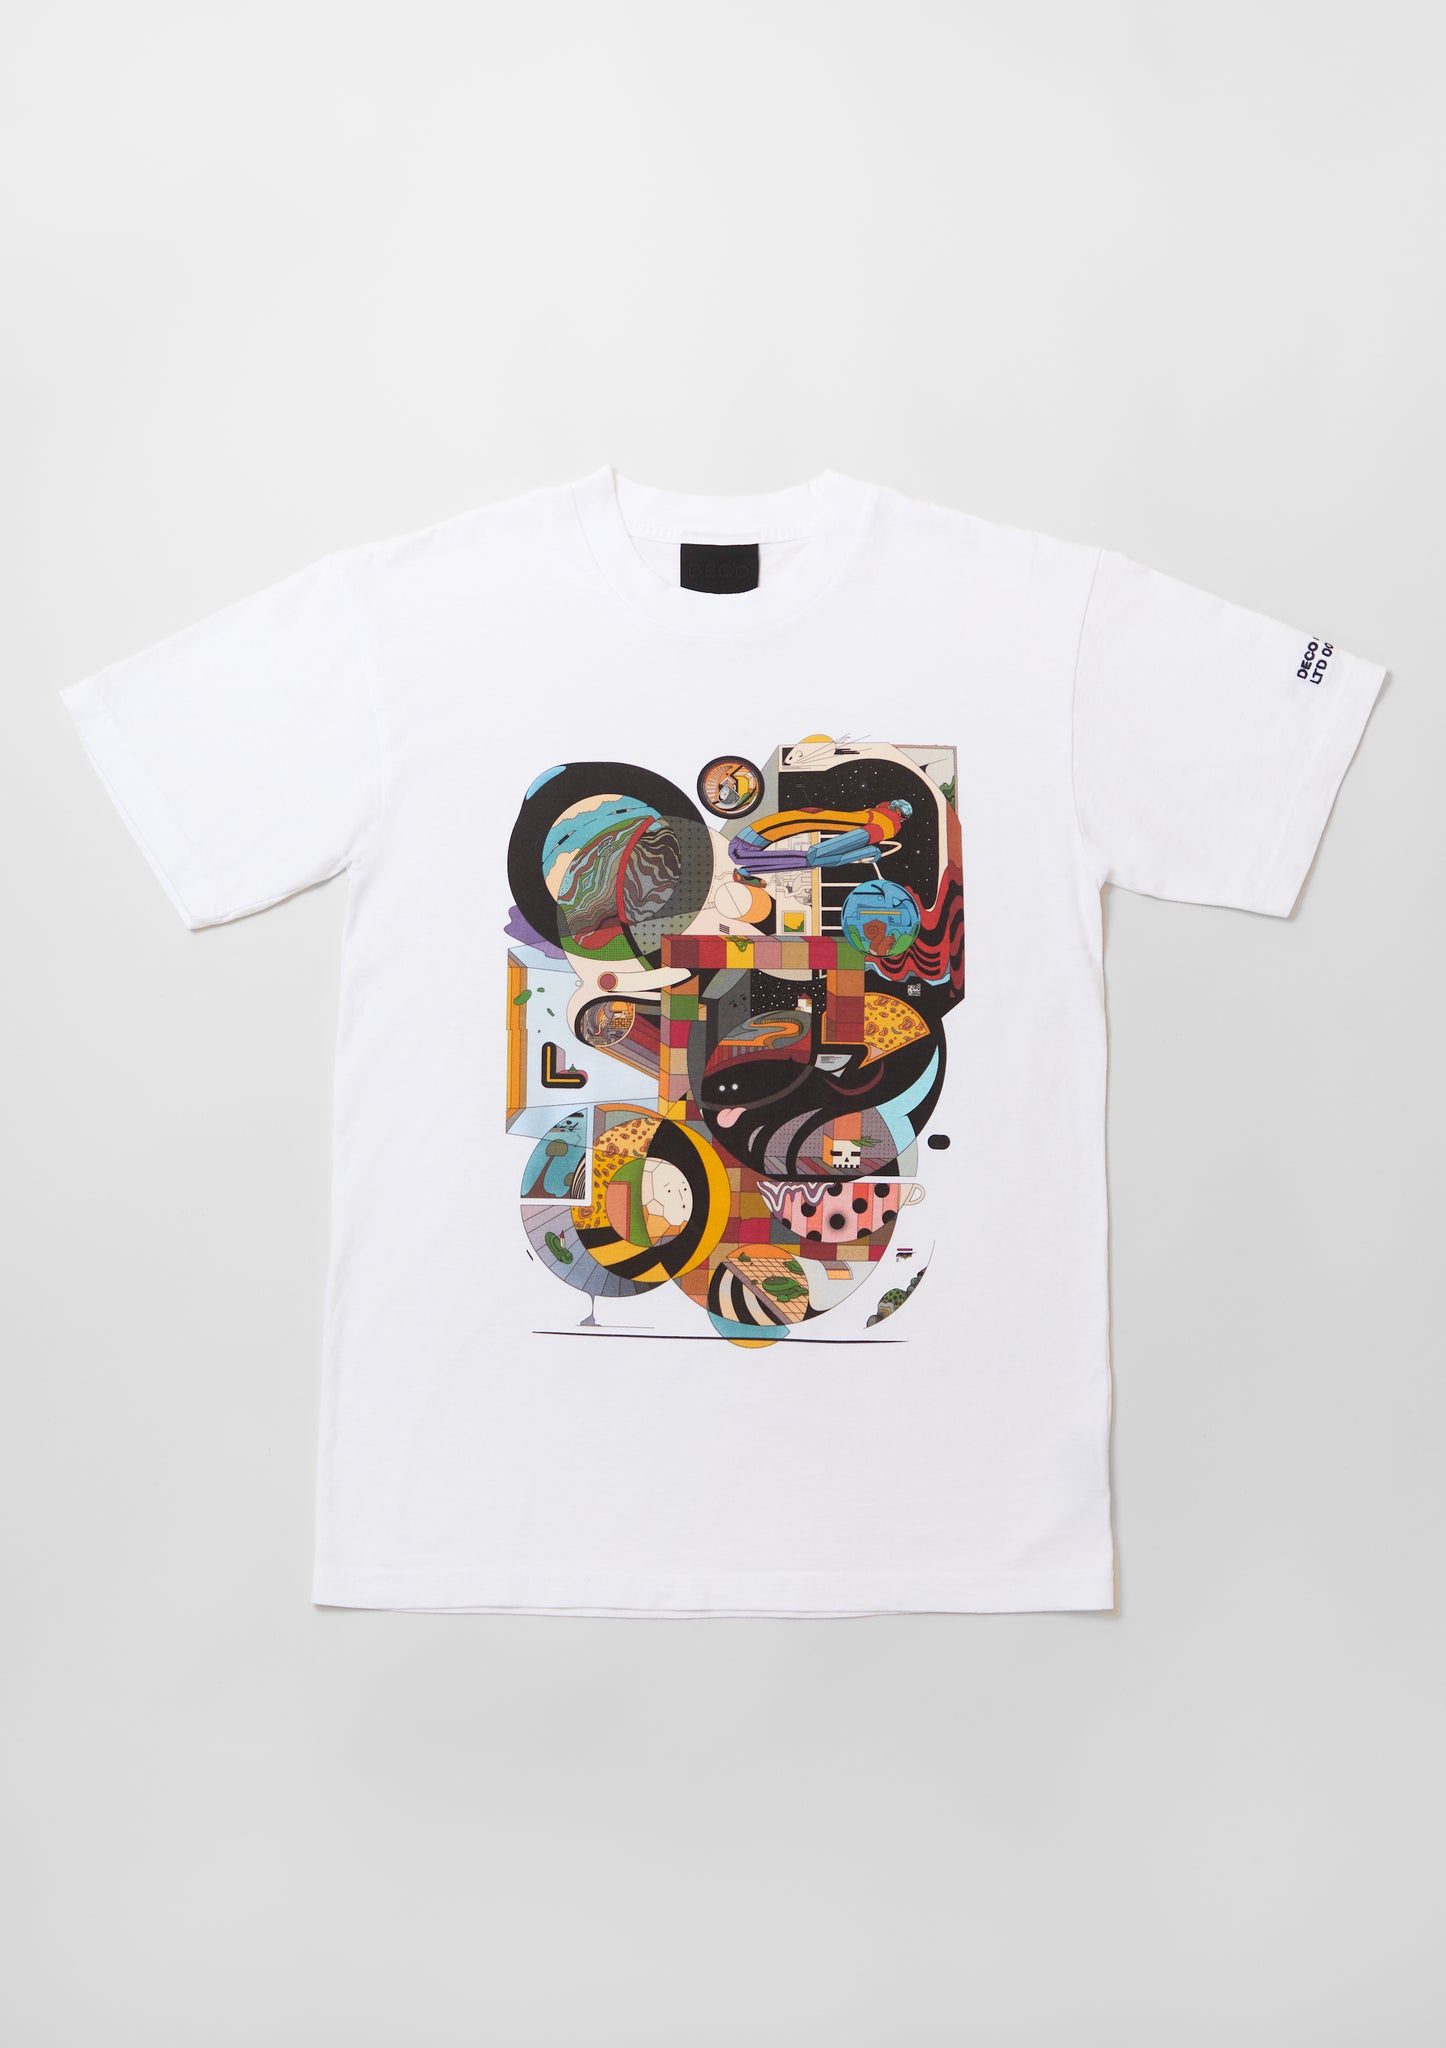 Massbase - Limited Edition Prints, Books, Streetwear for Artists